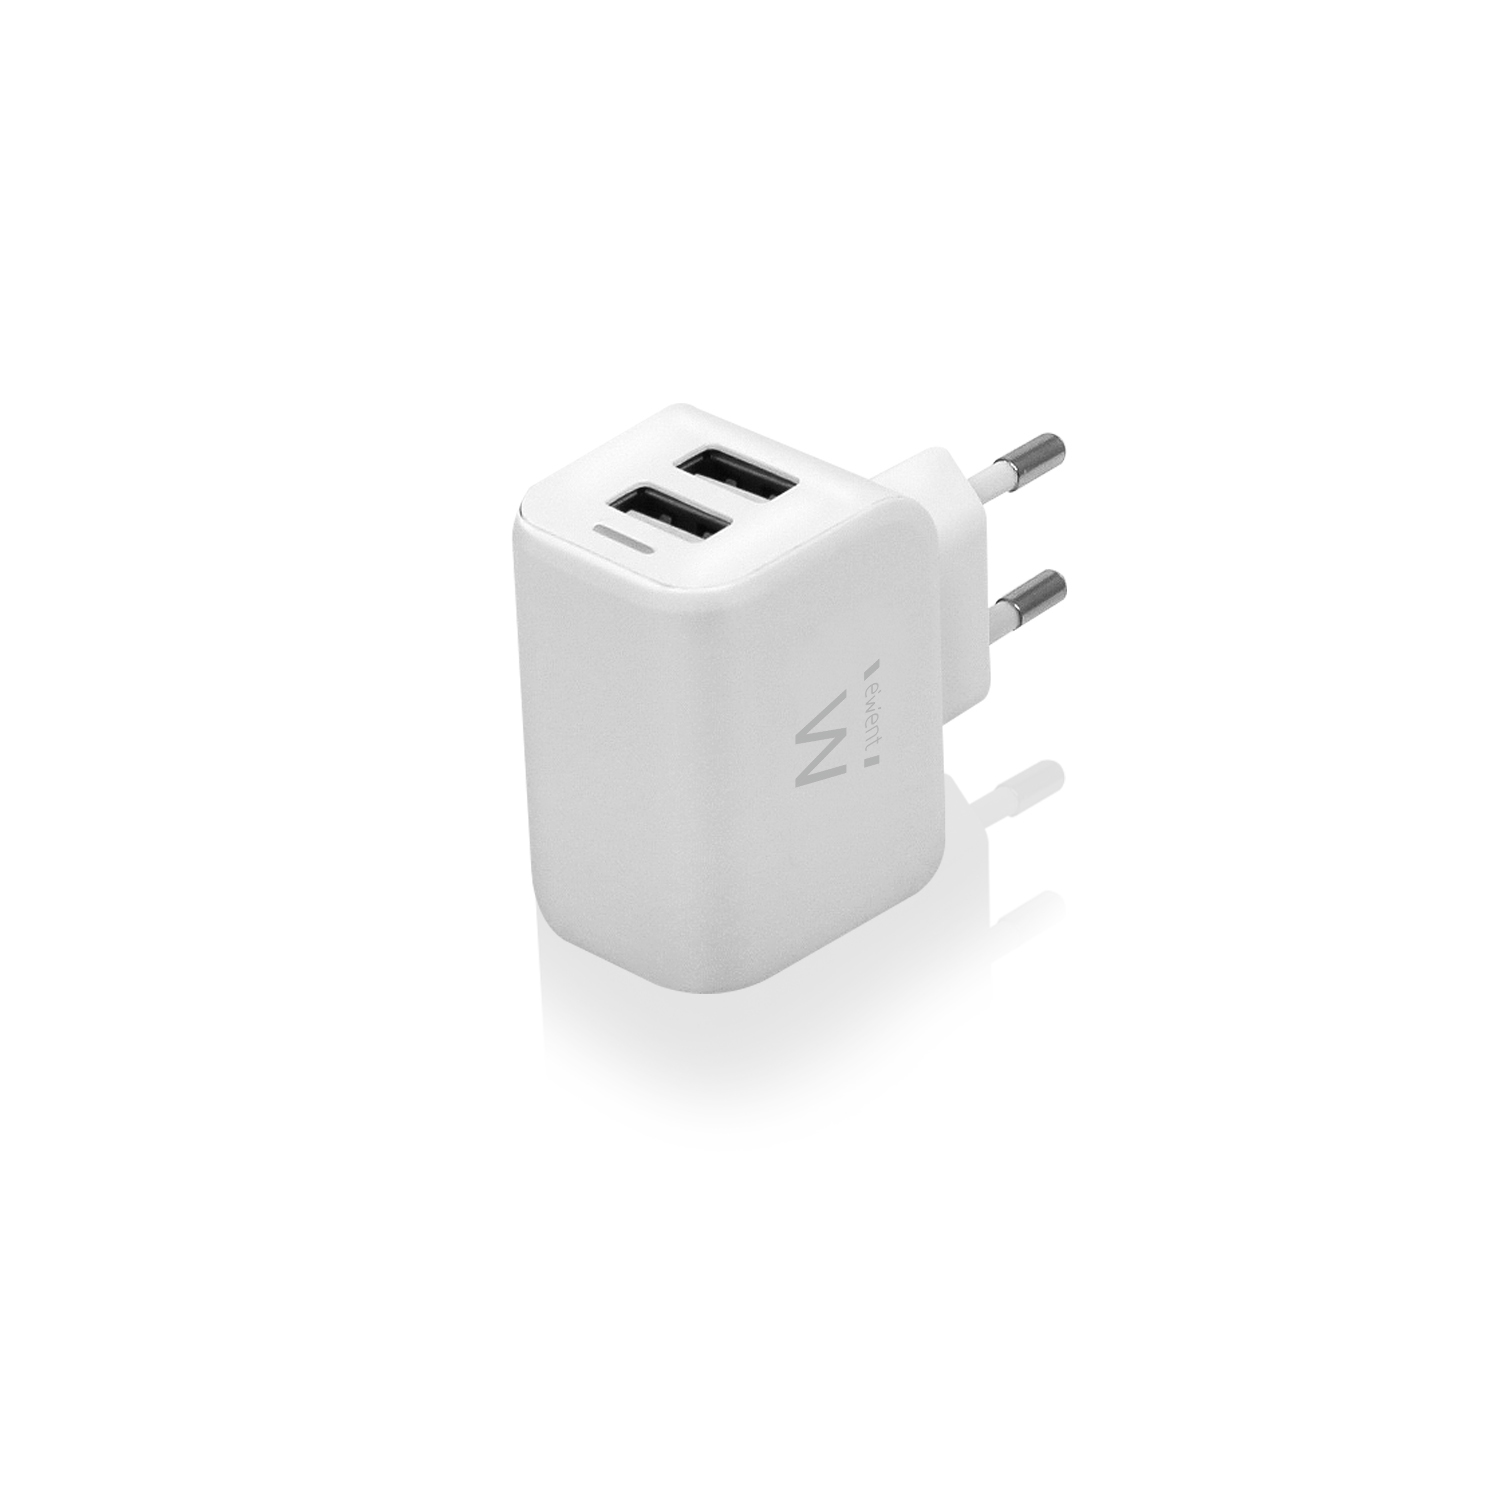 Image of EWENT - 2 PORT USB SMART CHARGER 2.4A - Ewent